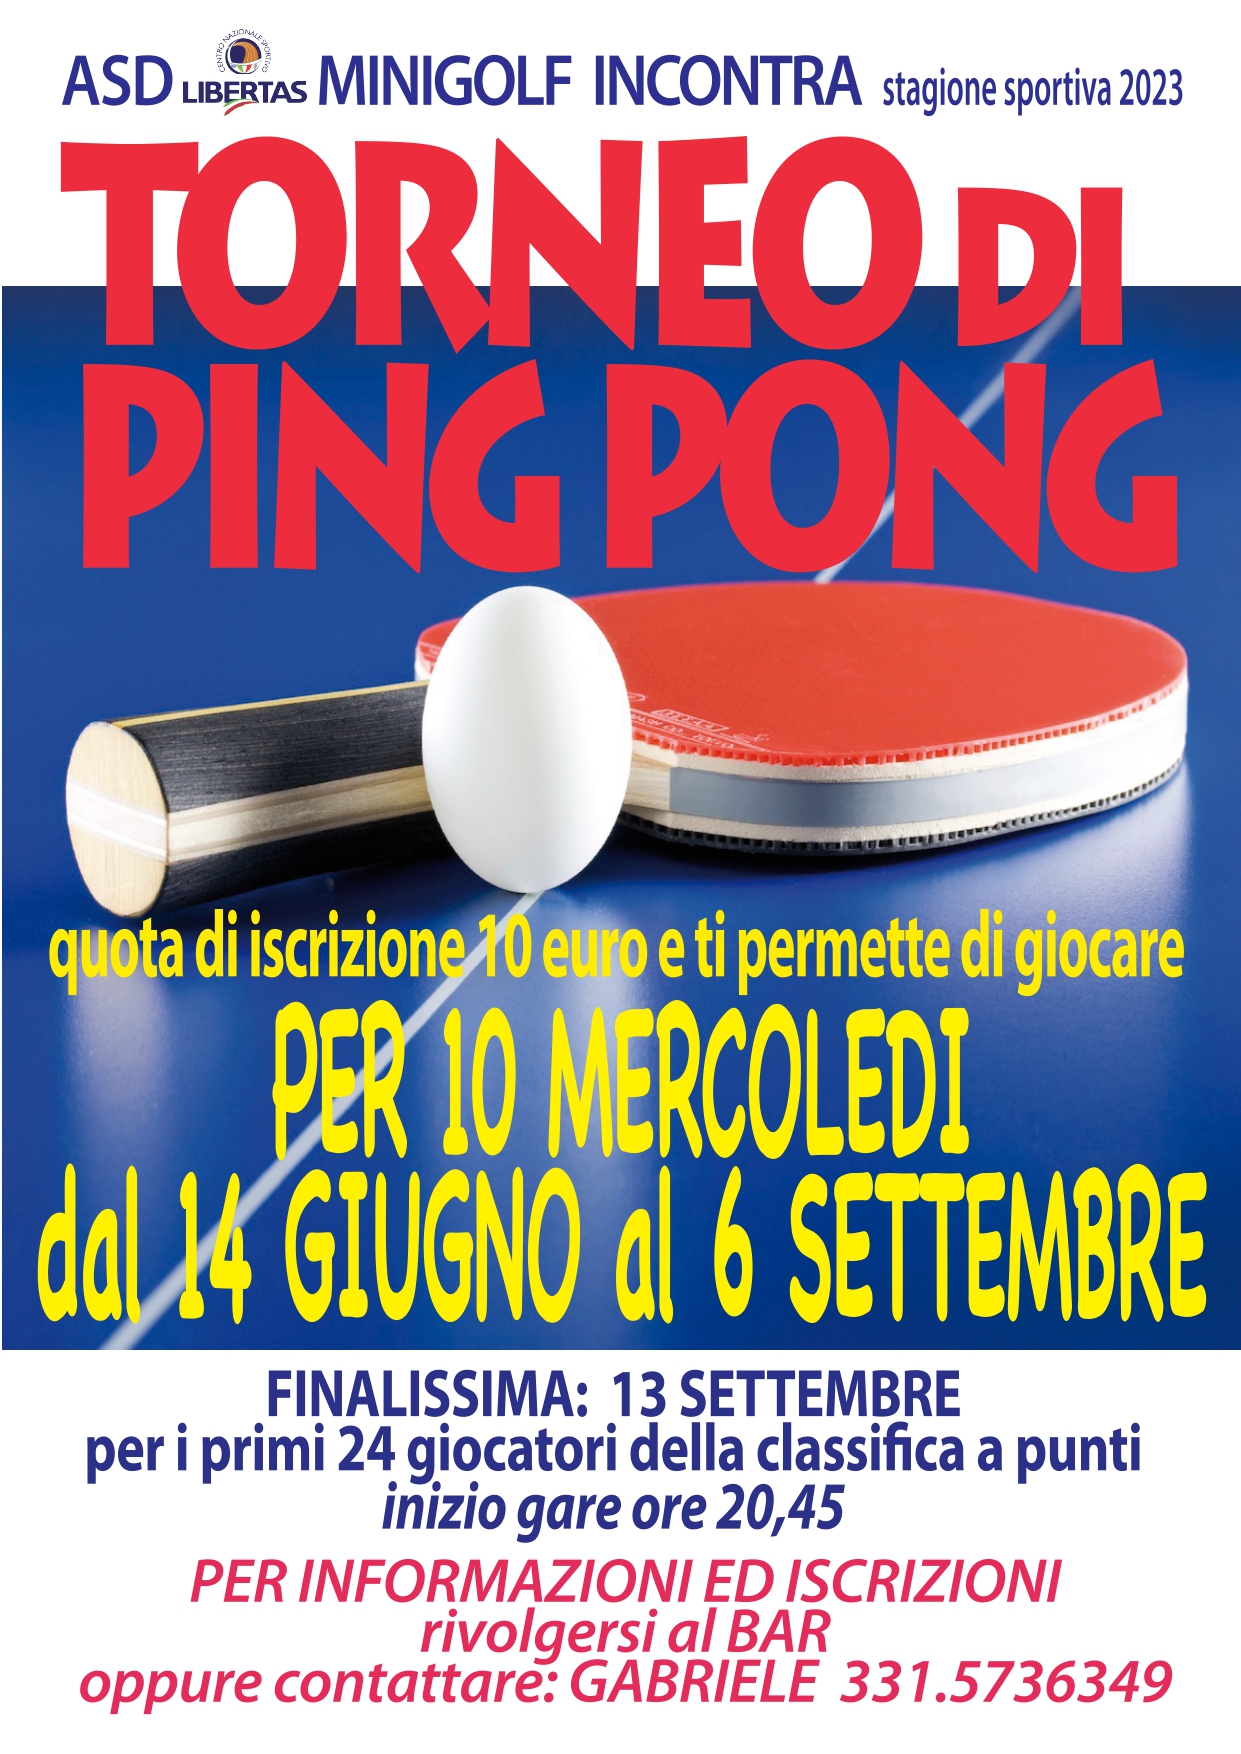 Torneo Ping Pong 2023